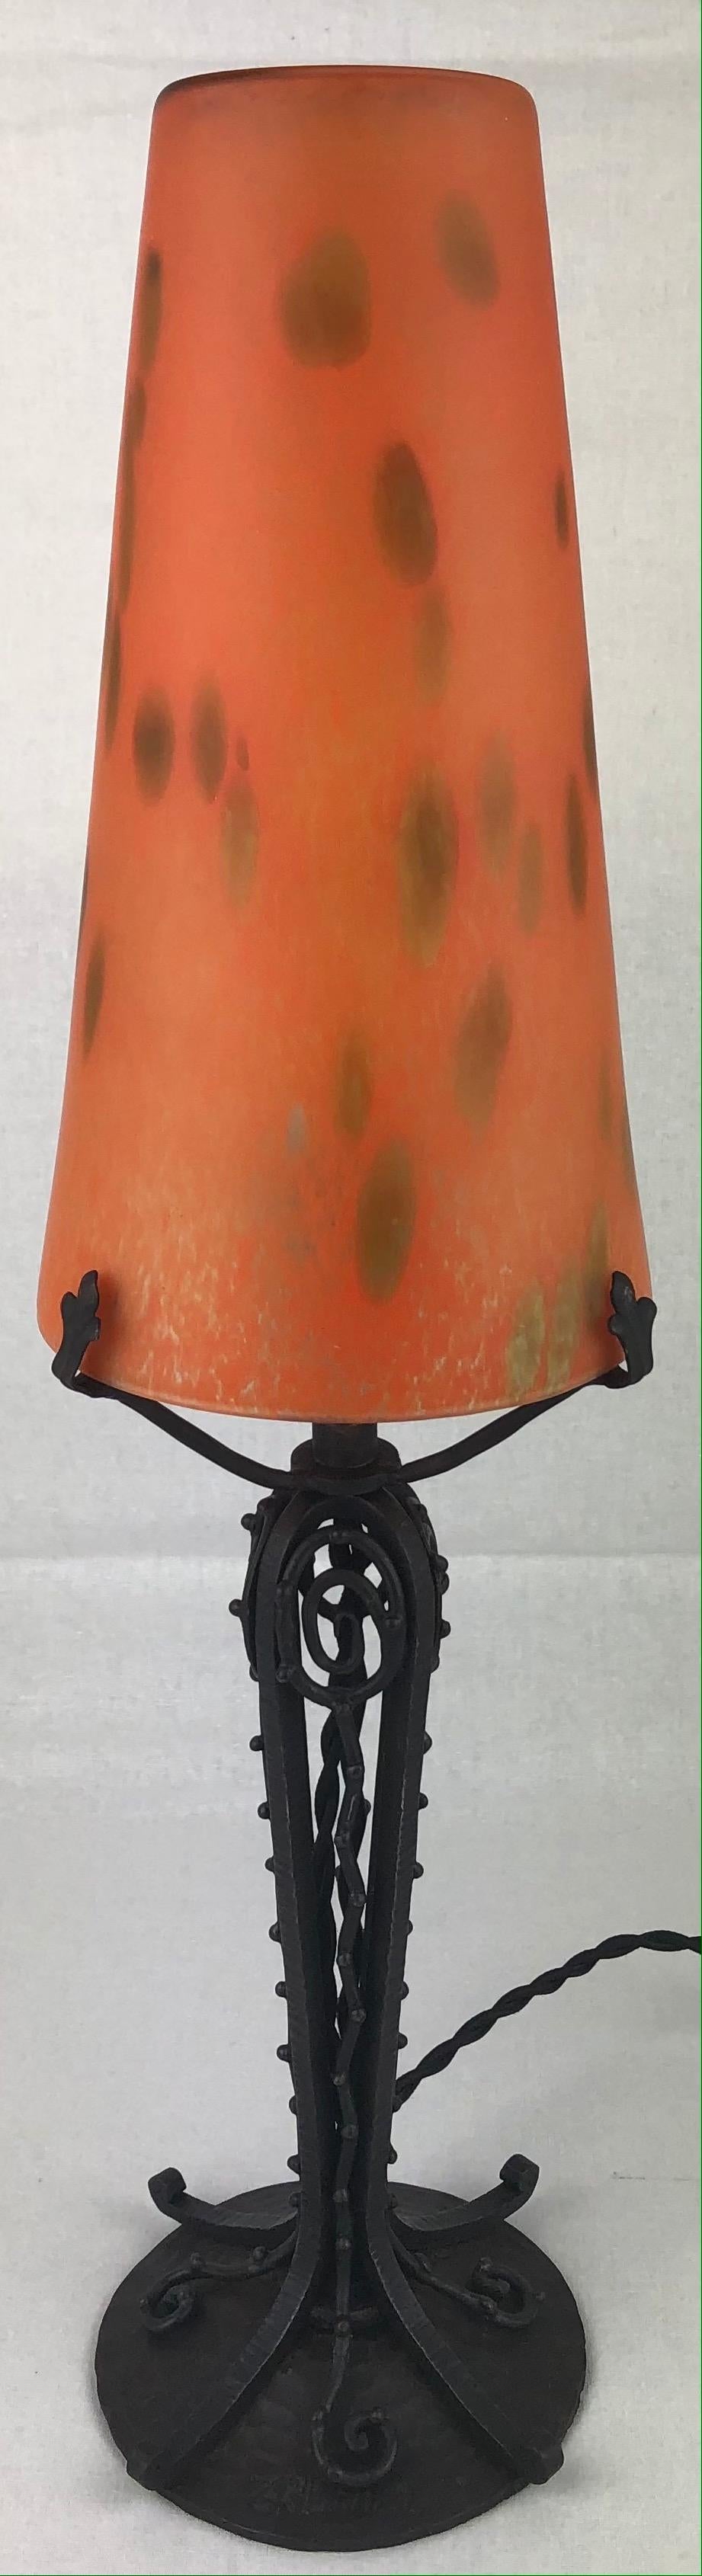 French Art Deco Table Lamp with Luneville Pate de Verre Signed Trichard 6